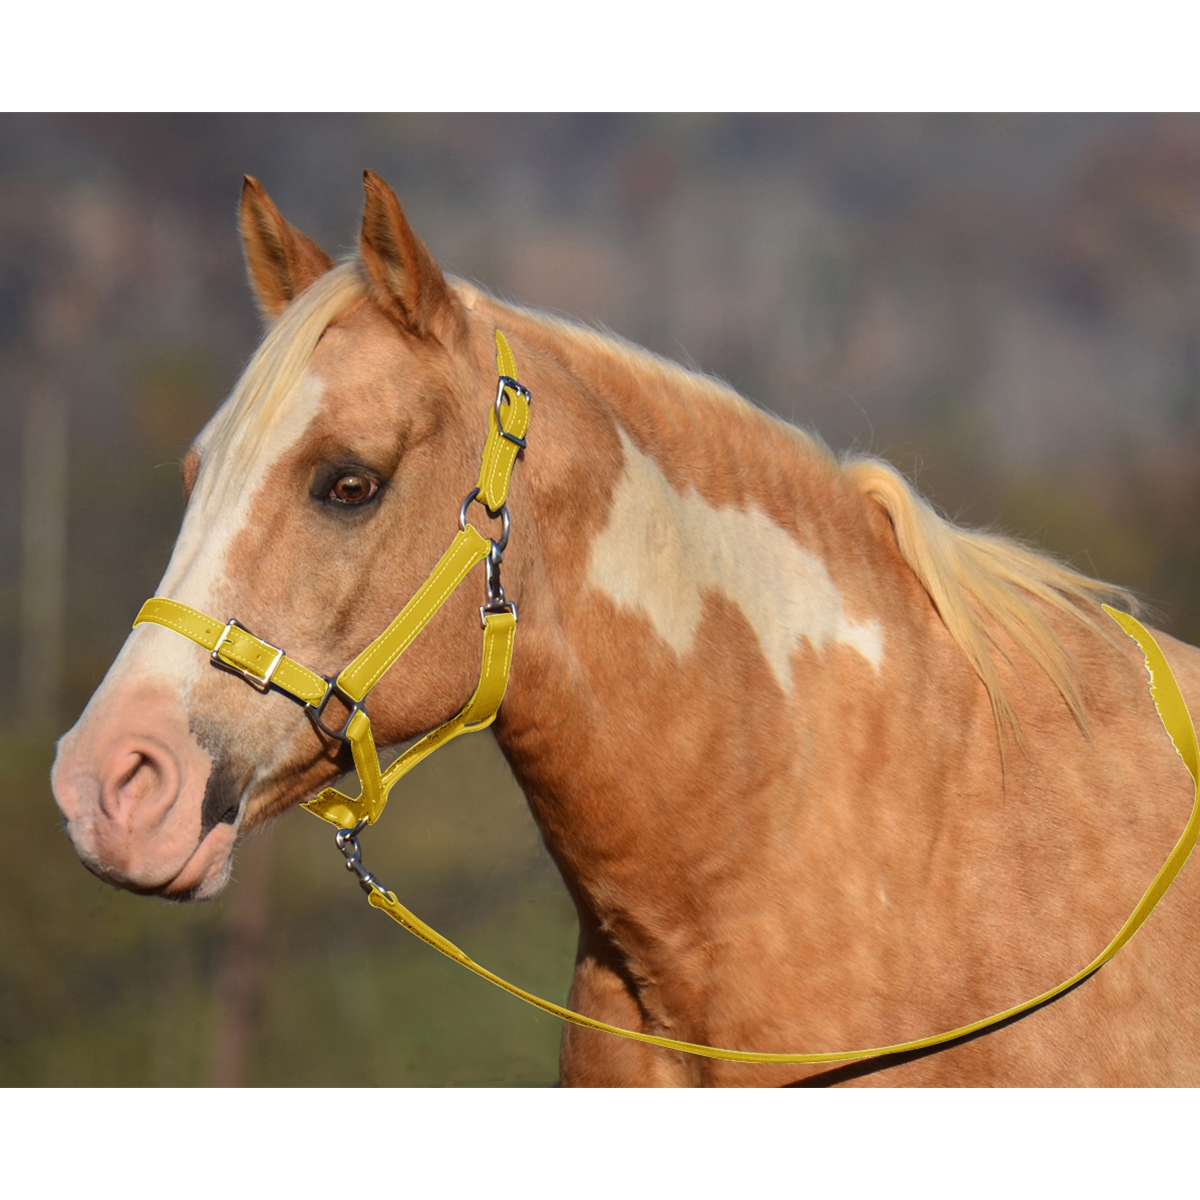 Sunflower Yellow Buckle Nose Safety Halter & Lead – Two Horse Tack